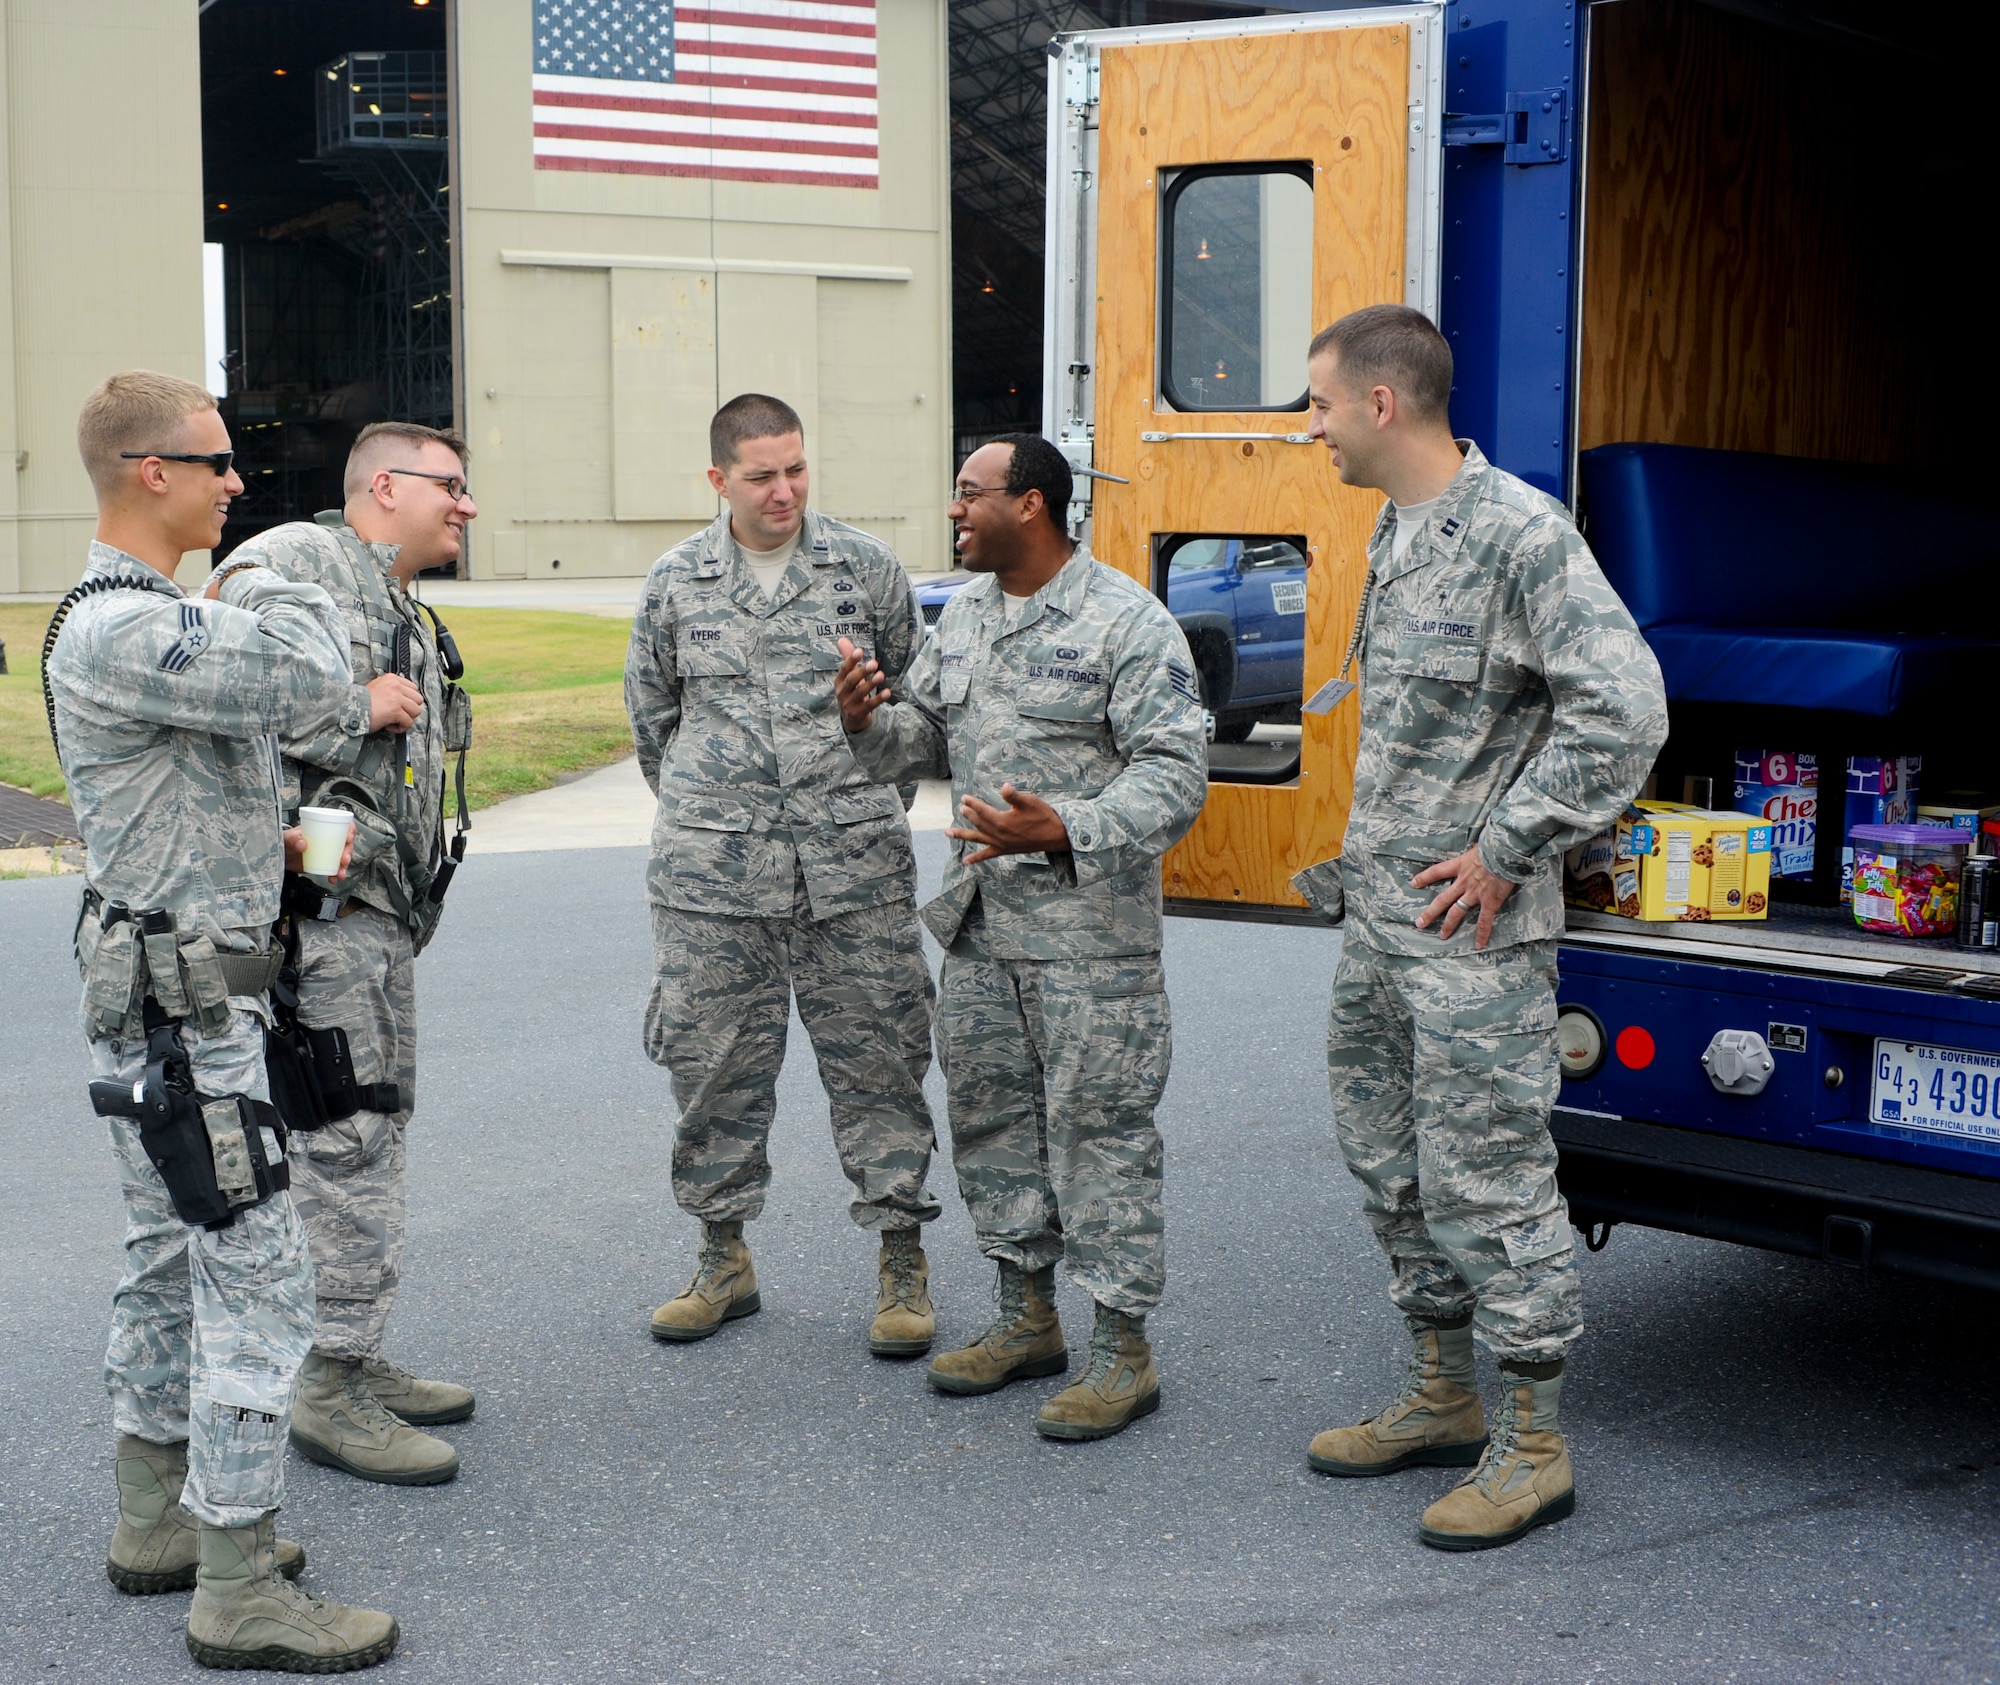 Staff Sgt. Javon Merritte (second from right), chaplain’s assistant with the 436th Airlift Wing, builds rapport with Airmen on the flightline at Dover Air Force Base, Del., July 20, 2012. Chaplain’s assistants form religious support teams with chaplains to get face time with troops, sometimes utilizing the “Holy Roller”, a supply vehicle, to distribute food and drinks to those who work outside in the elements. (U.S. Air Force photo by Airman 1st Class Kathryn Stilwell)